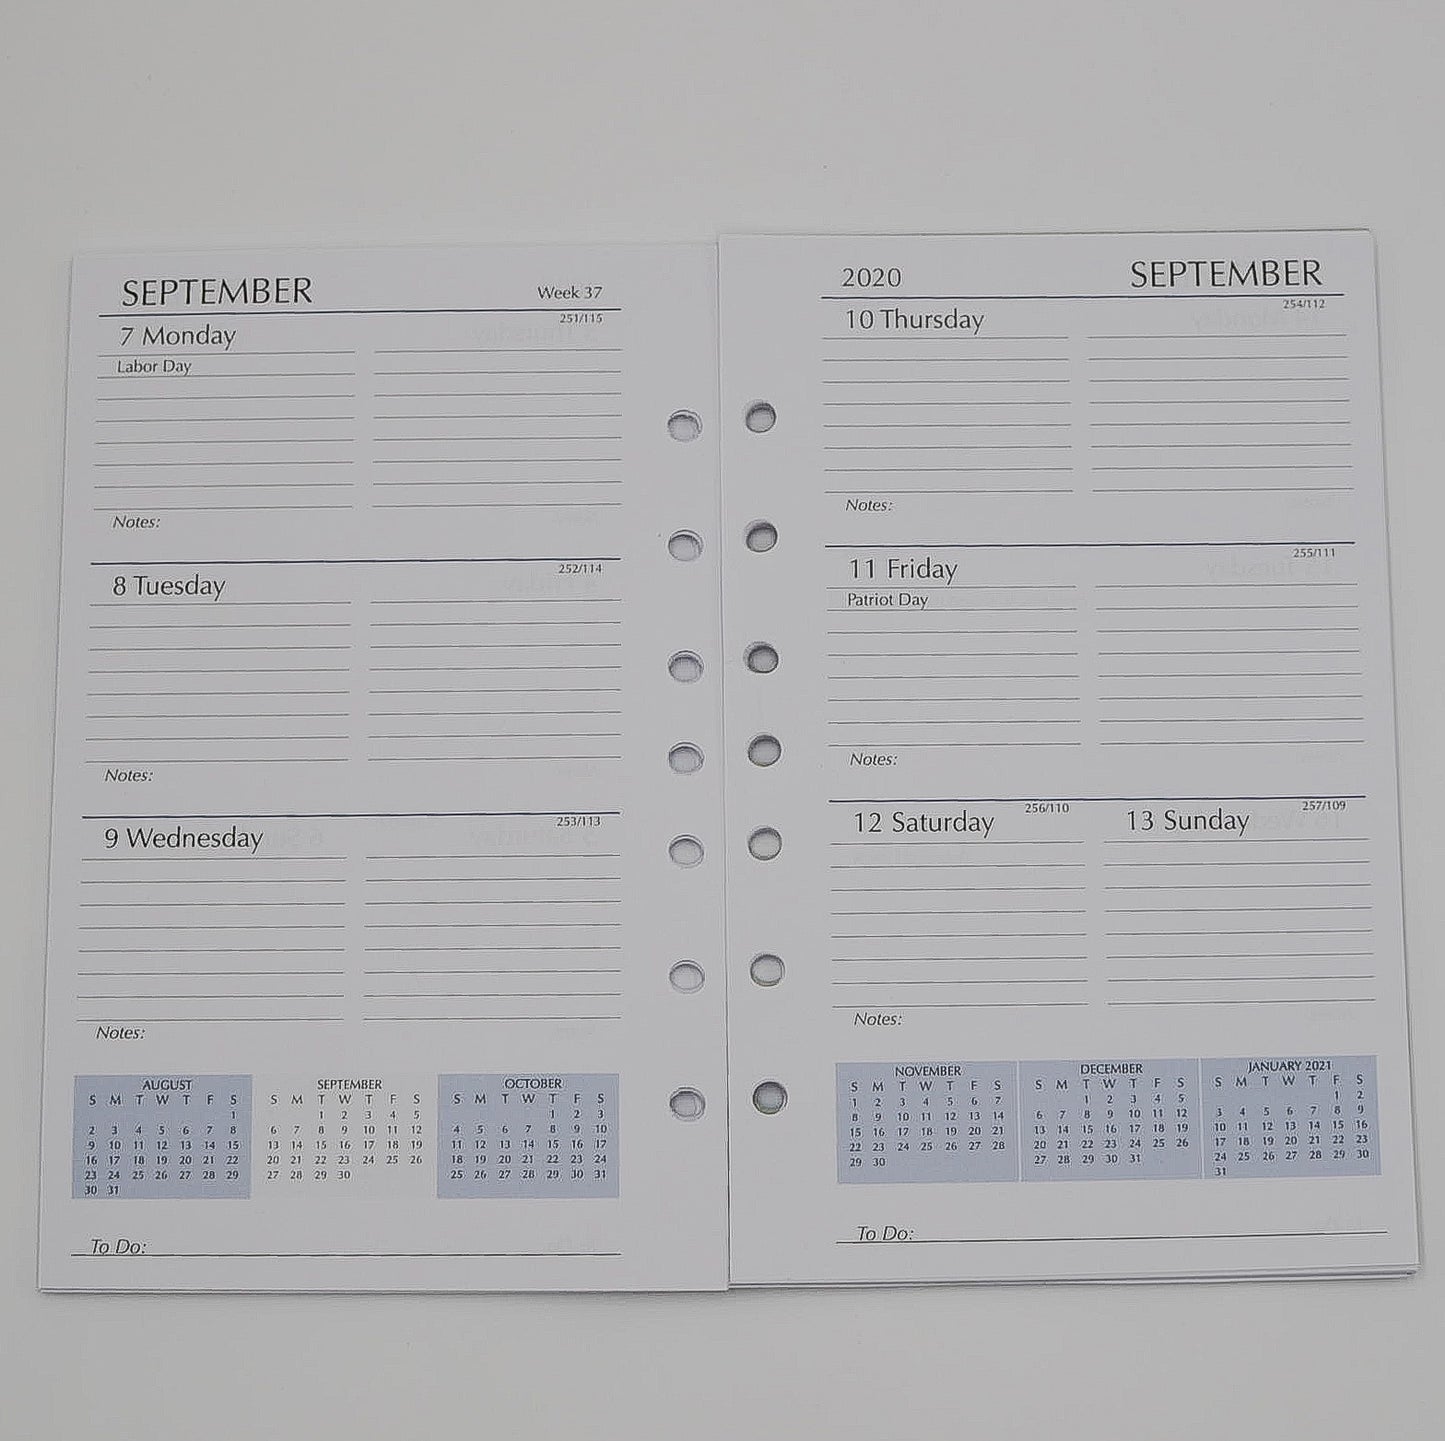 2022 2021 calendar refill McCarthy Planner- Item MP58P7 12 Month Planner  White paper. Size 8-1/2"X 5-1/2" 7 -Ring 144 pages; Weekly and Monthly View Format. One agenda planner; two formats. Also includes a 3 Yearly View, 12 Monthly View, 52 Weekly View. And includes Advance Planning, Important Dates, International Holidays, Birthdays and Anniversaries, Weights and Measures, Weather, Interest Rates, Road and Air Miles...and more! Calendar refill only.  Made in the USA!